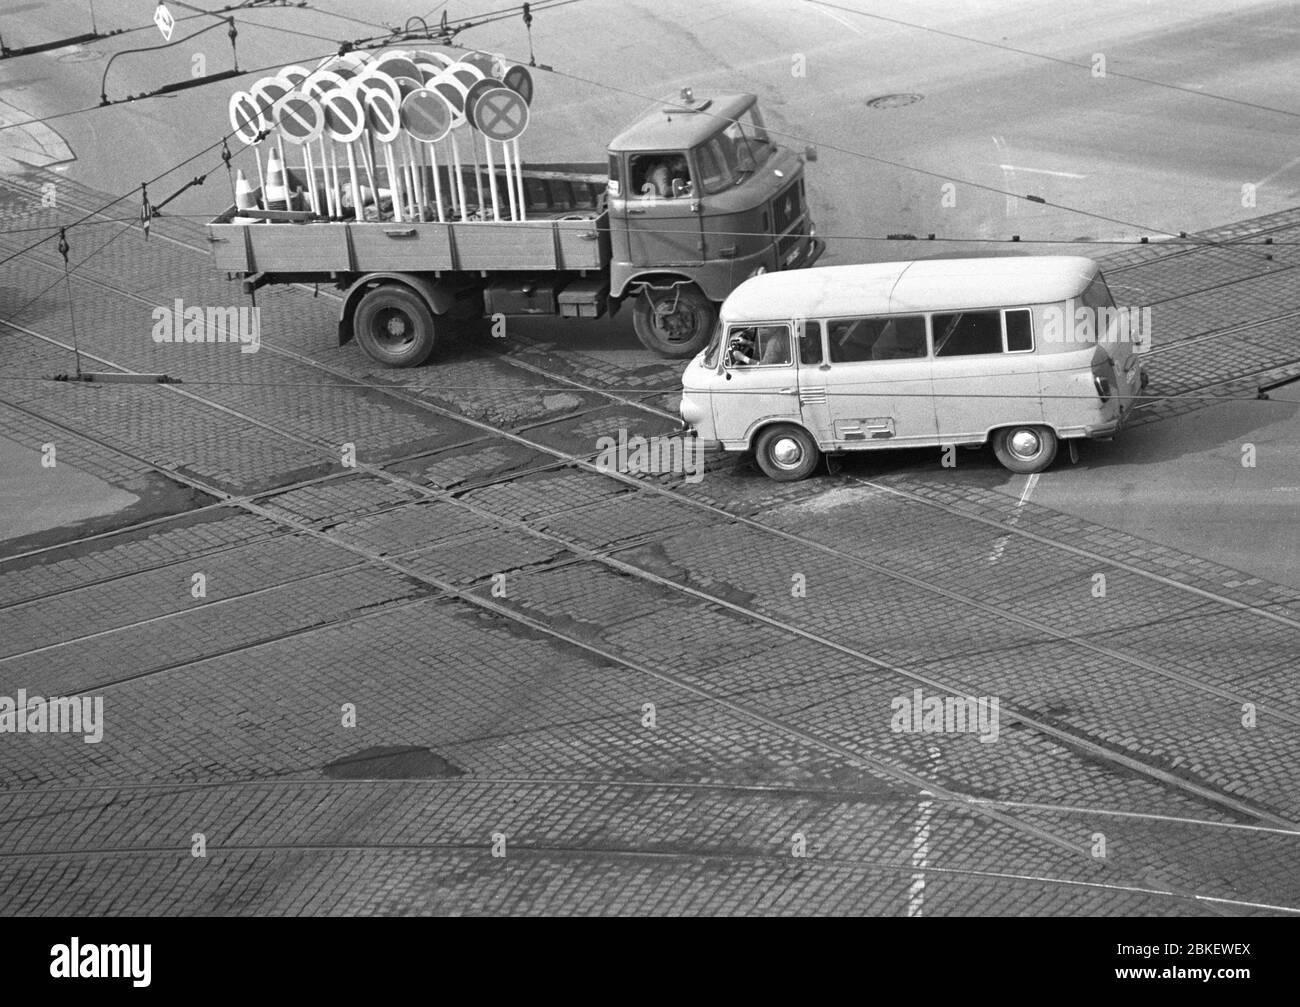 20 June 1980, GDR, Leipzig: At the Karl-Marx-Platz intersection in Leipzig in the early 1980s, a W50 truck with traffic signs and a Barkas B1000 van meet. Photo: Volkmar Heinz/dpa-Zentralbild/ZB Stock Photo